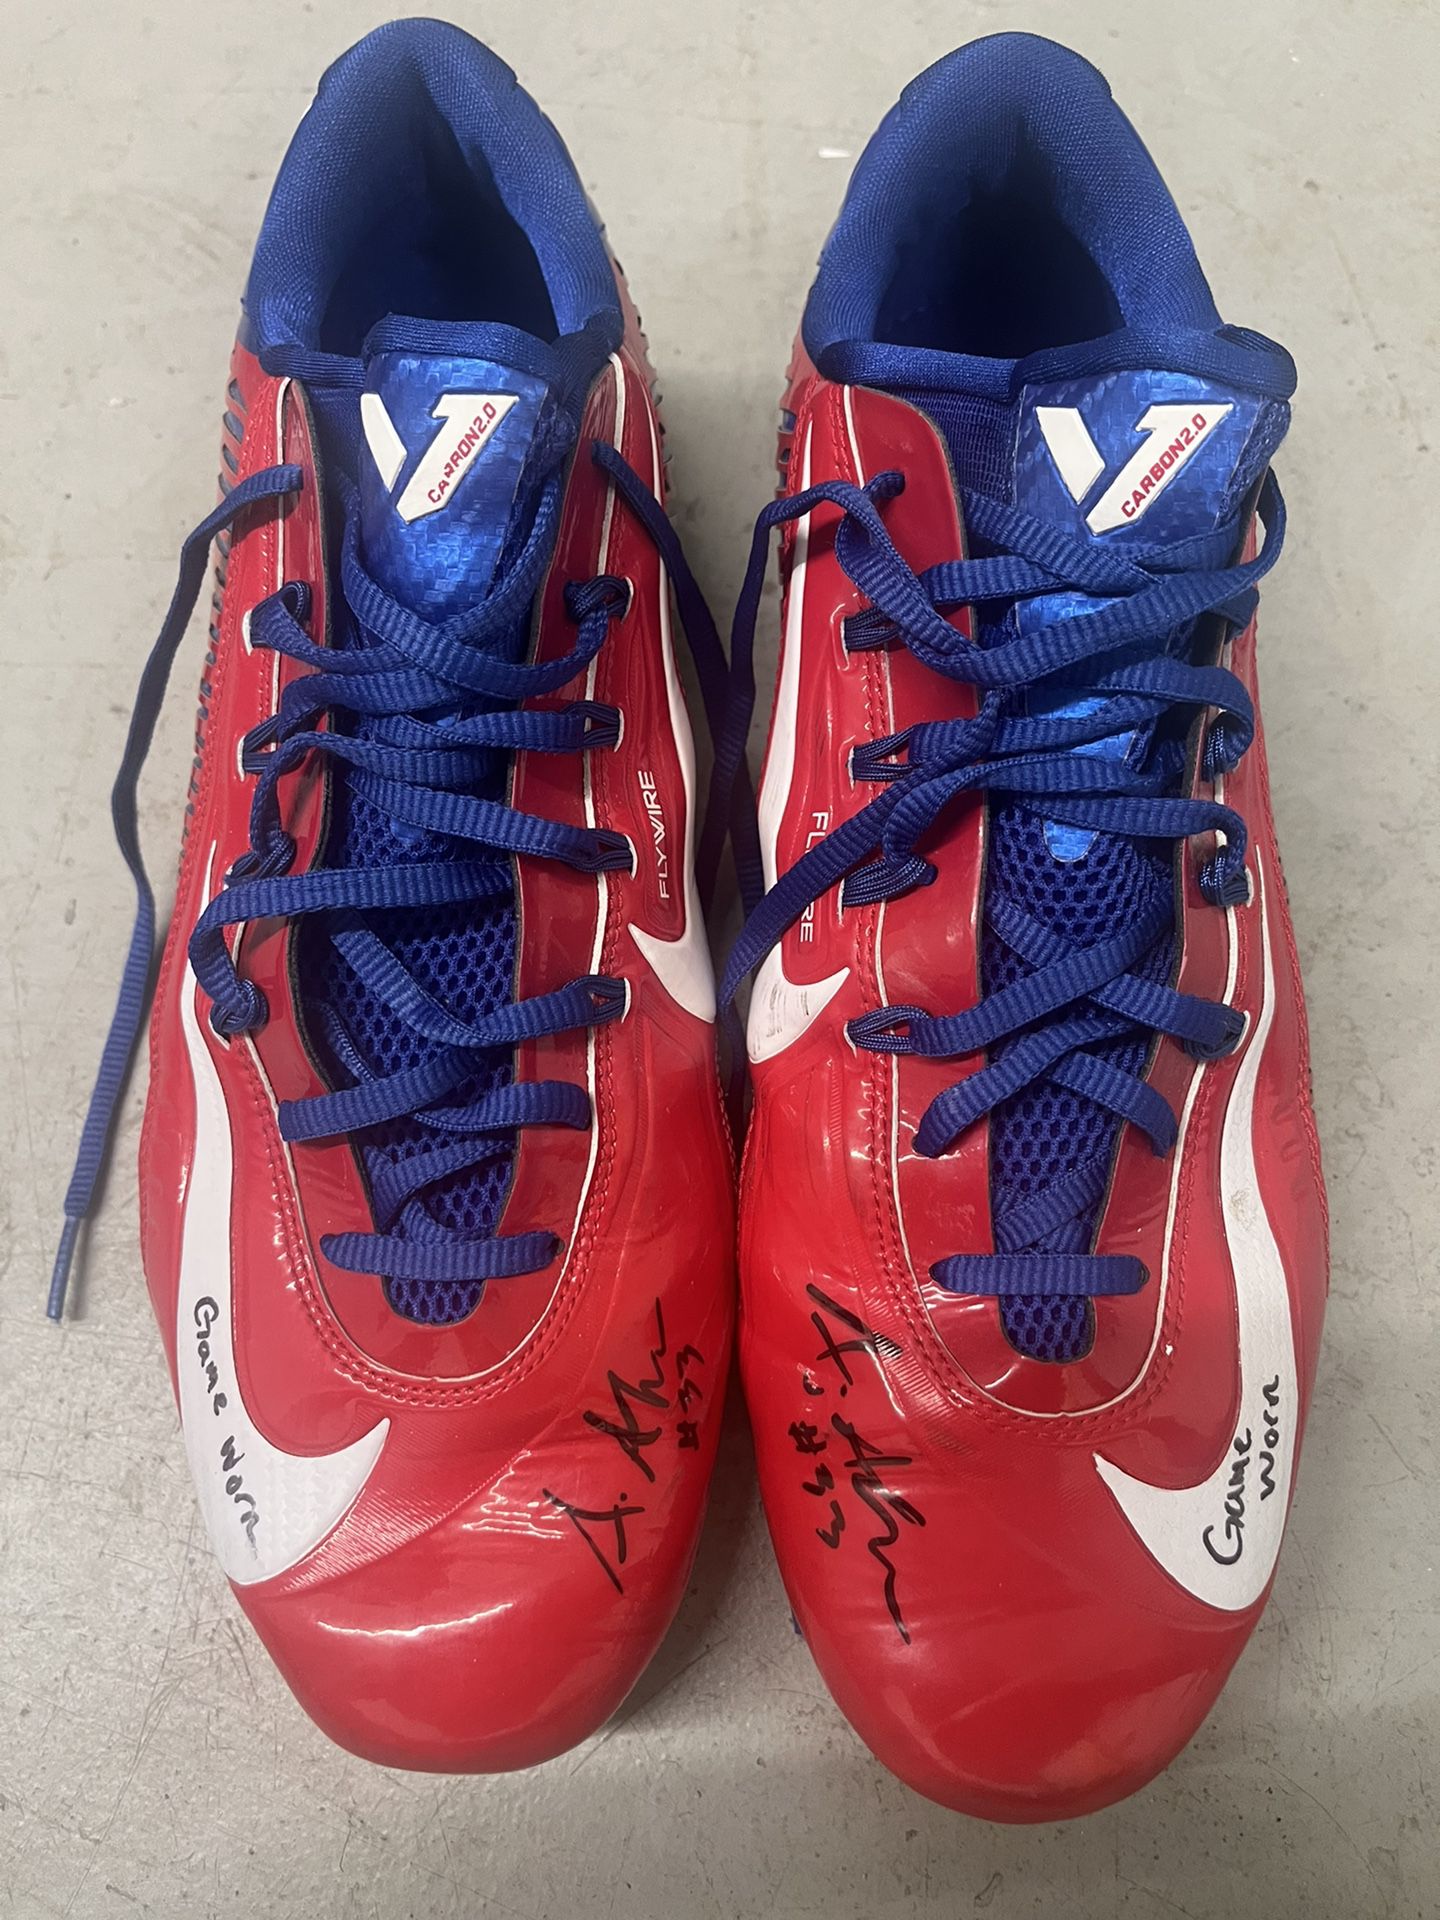 Andrew Adams New York Giants Game Issued Cleats